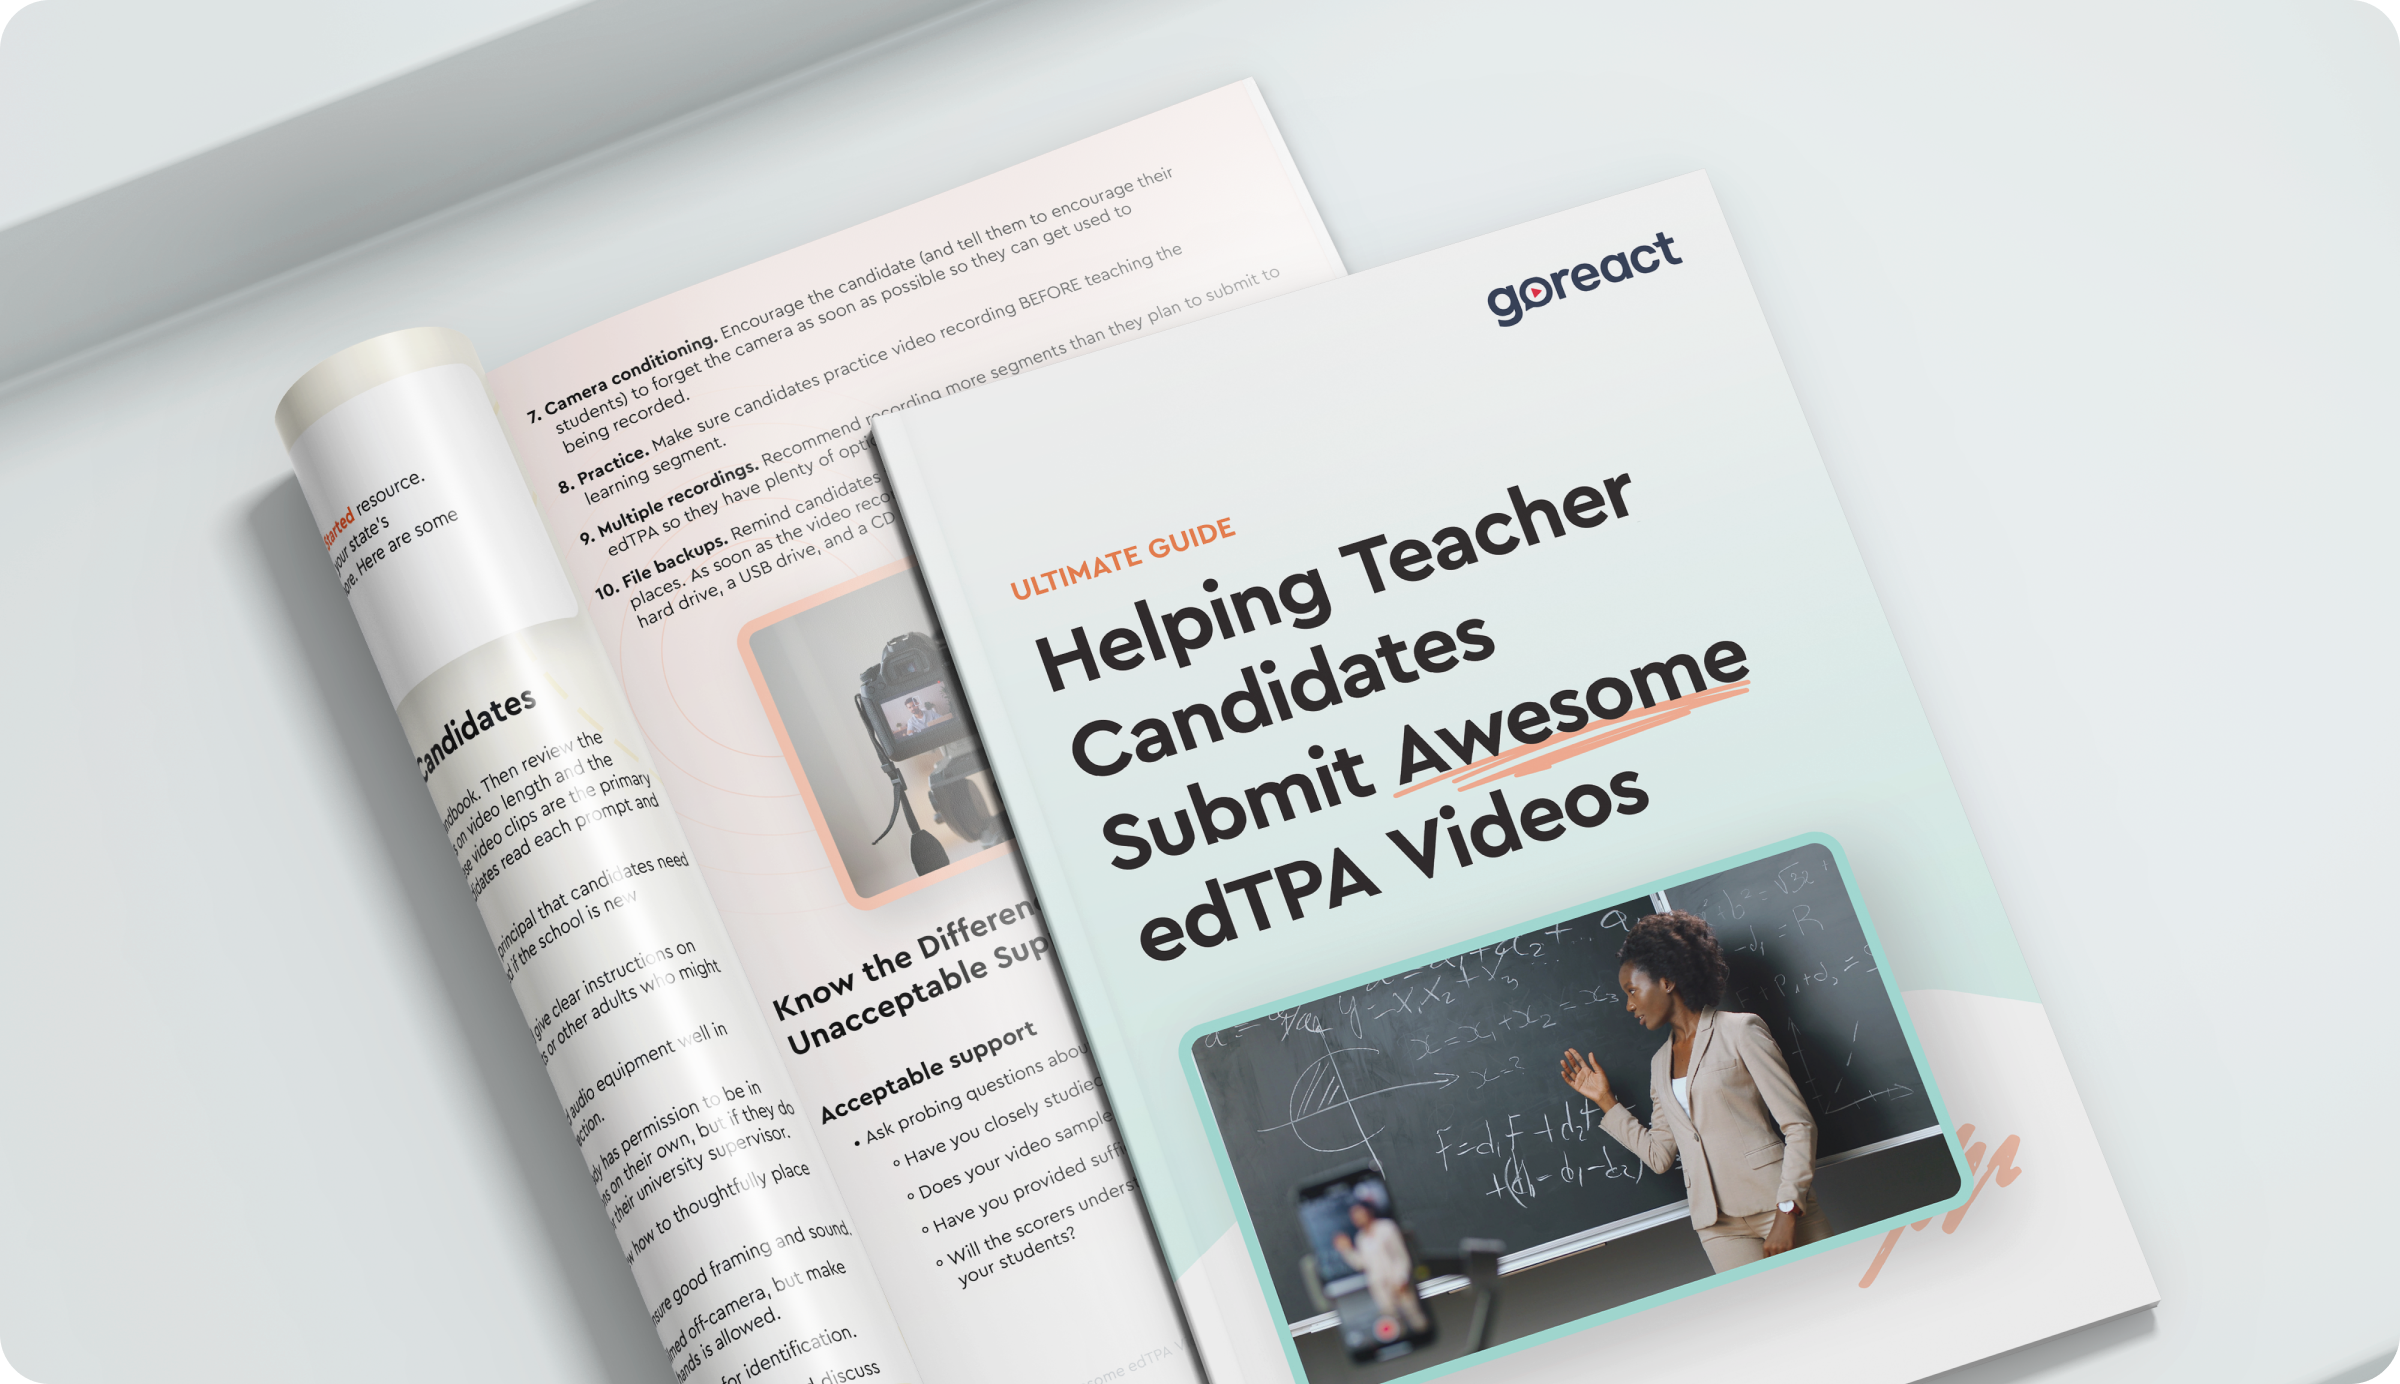 Ultimate Guide: Helping Teacher Candidates Submit Awesome edTPA Videos